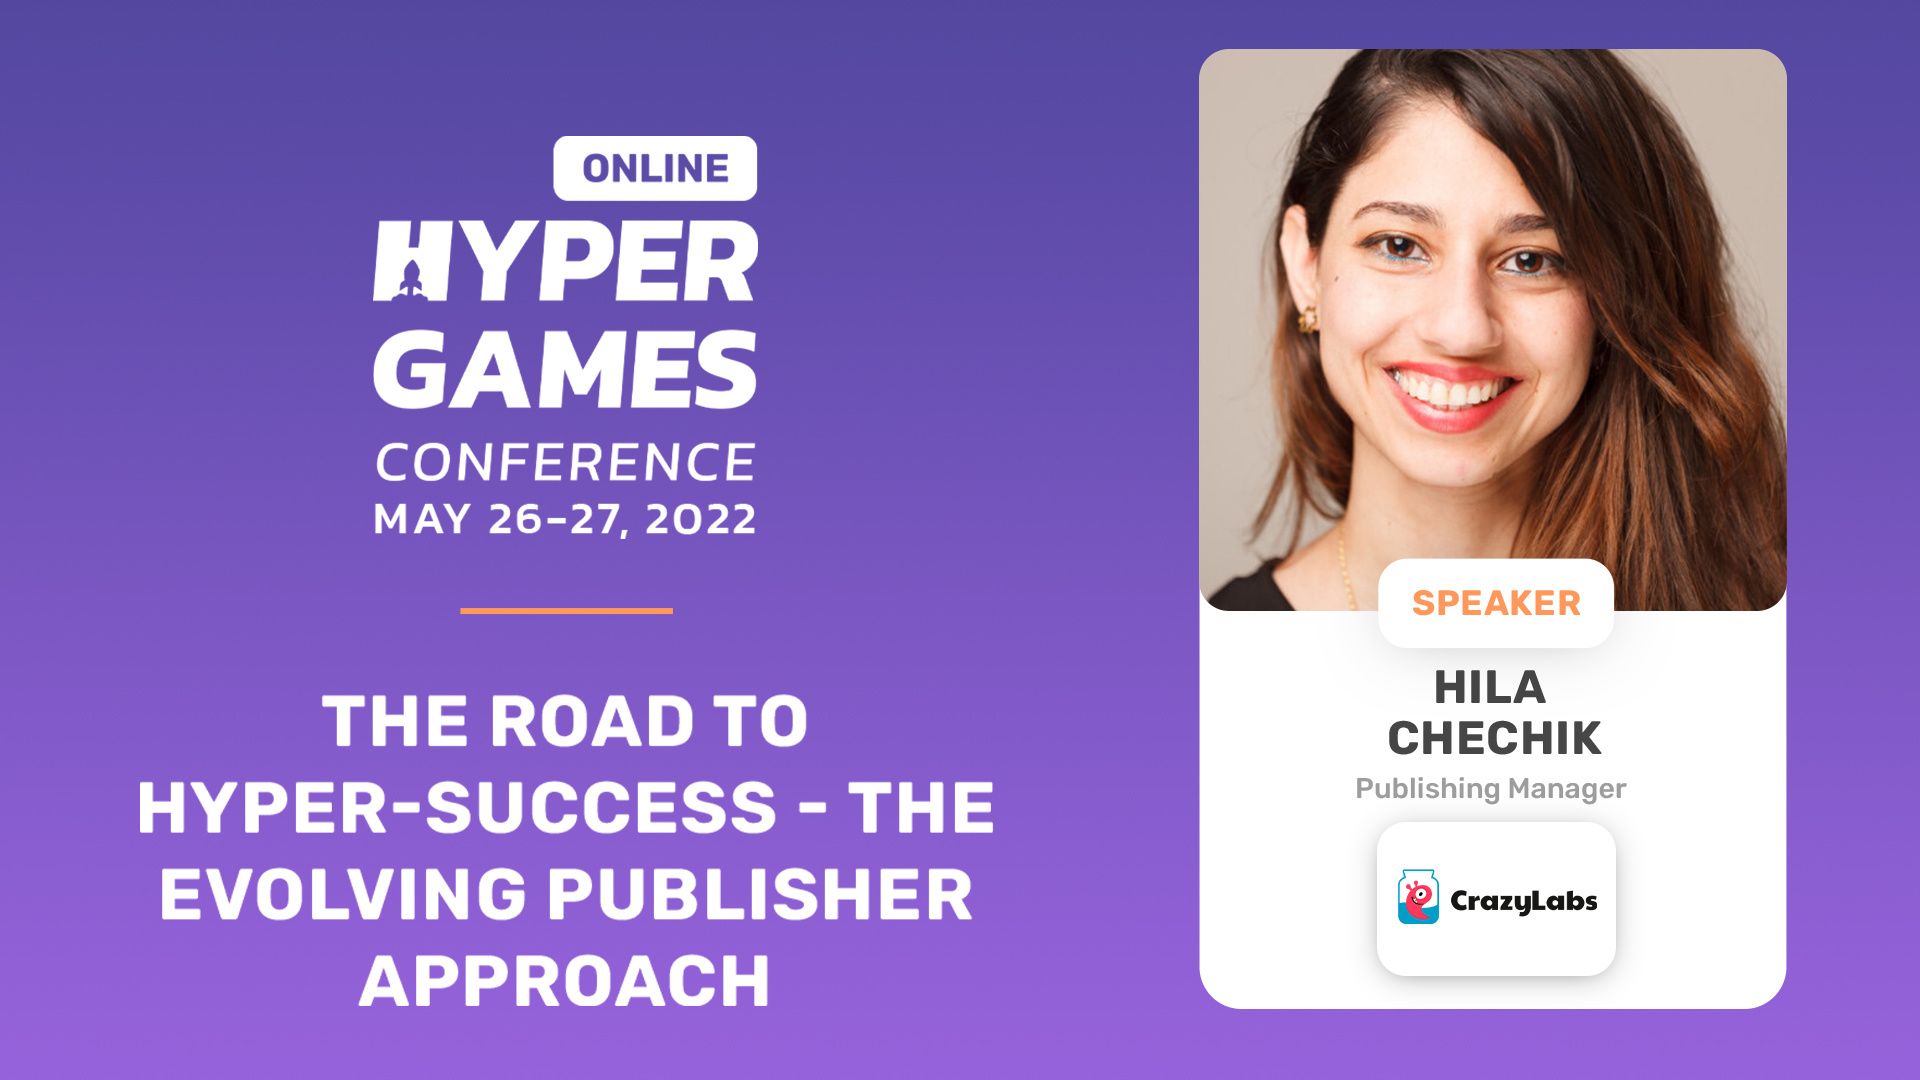 The road to hyper-success – the evolving publisher approach by CrazyLabs